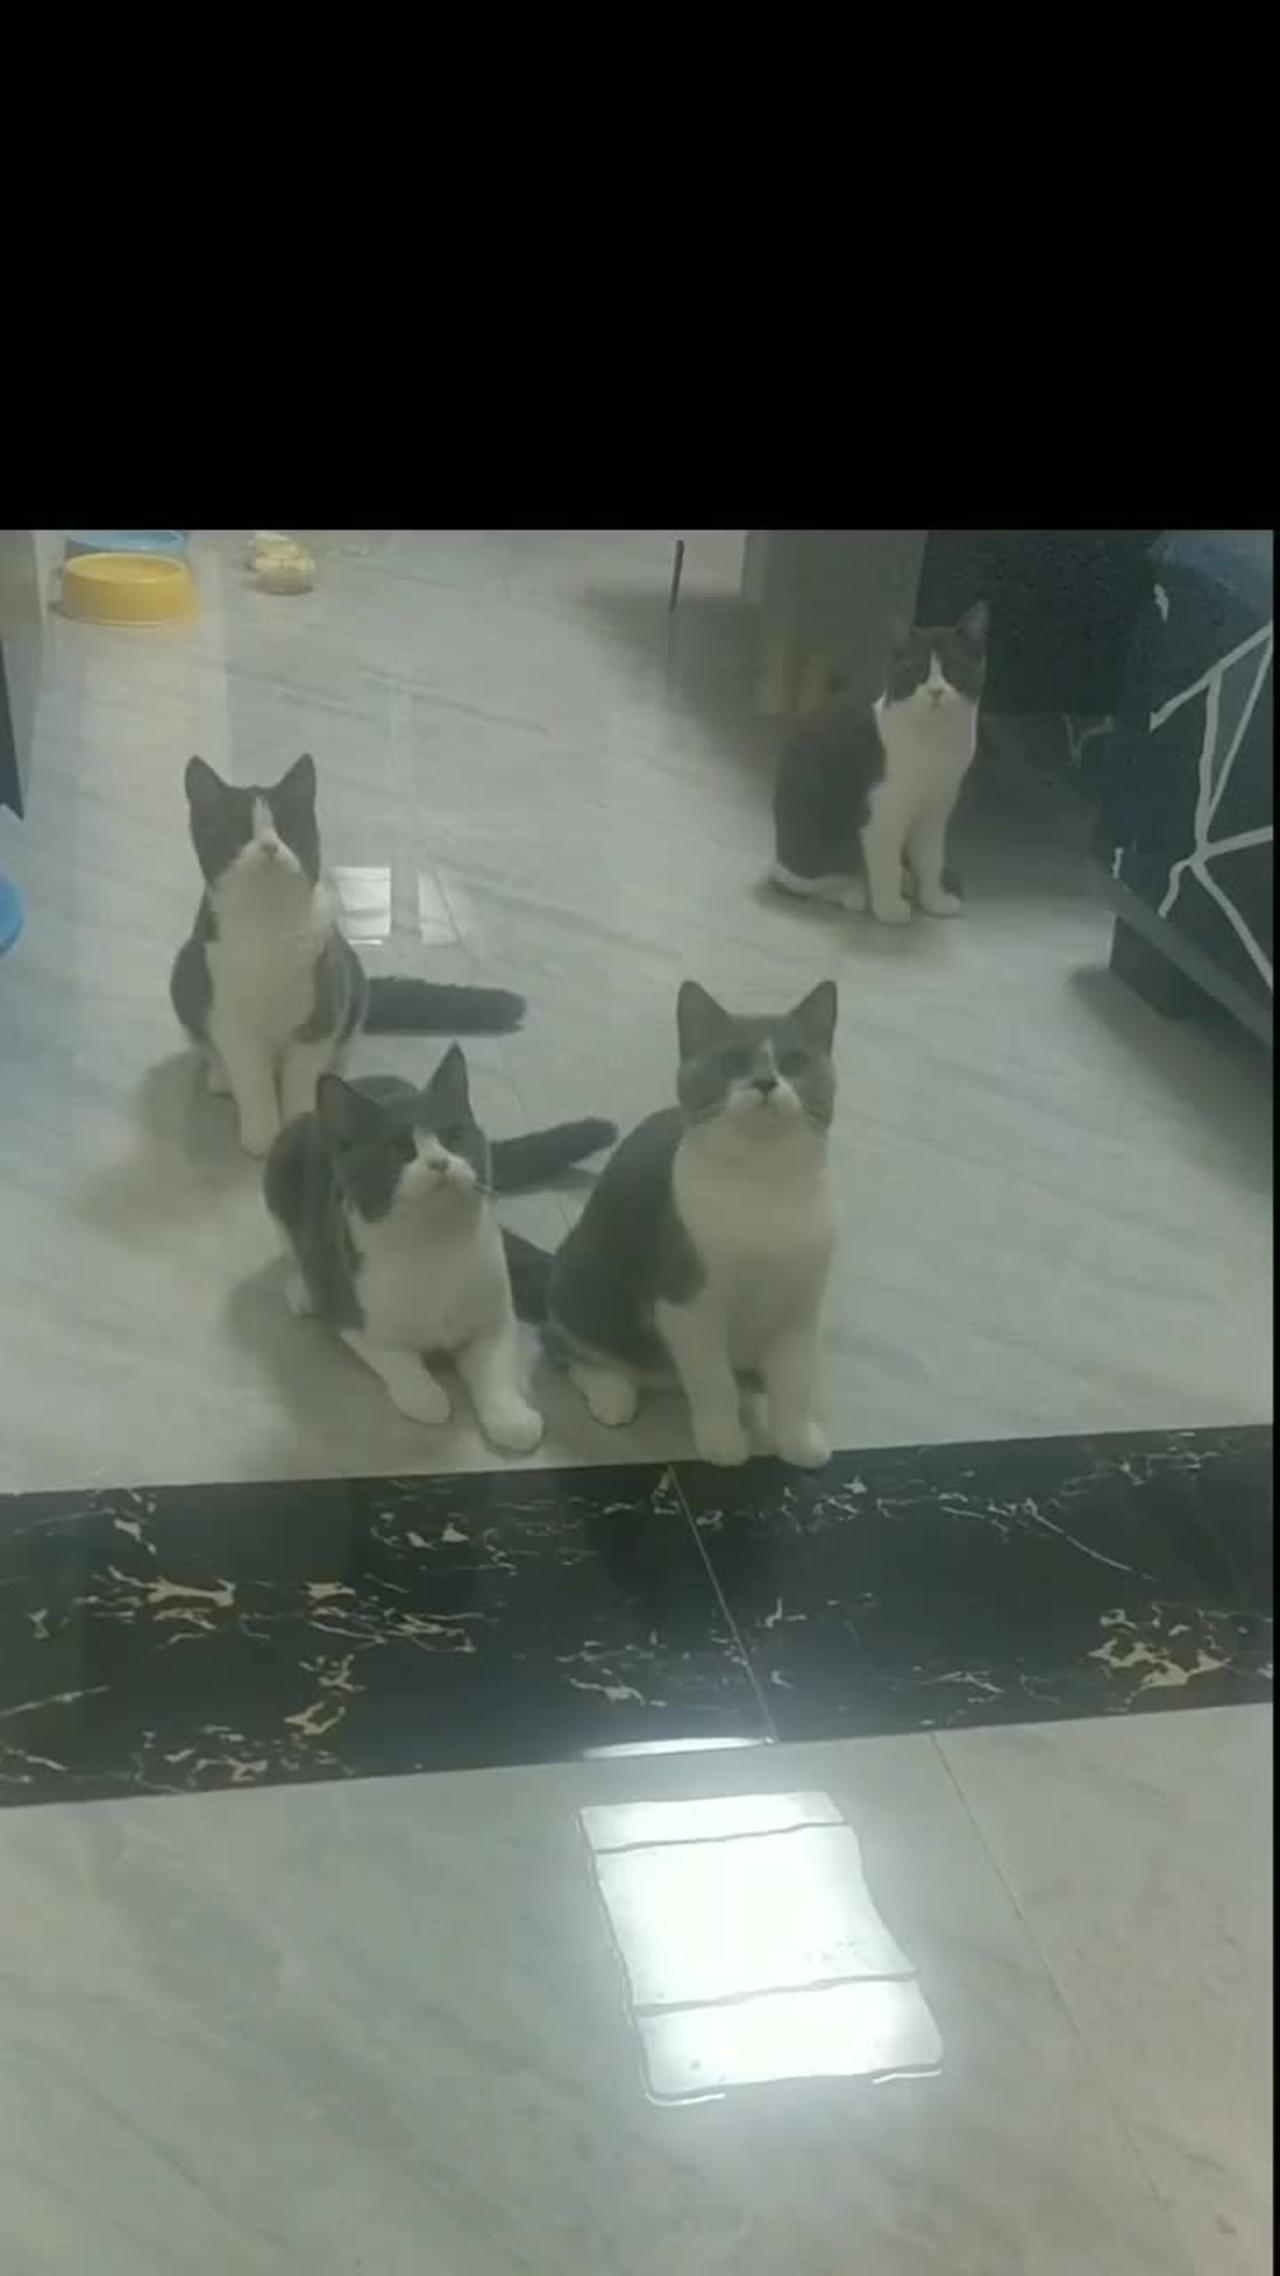 Ahaha, these four cats have the same expressions and actions, so funny